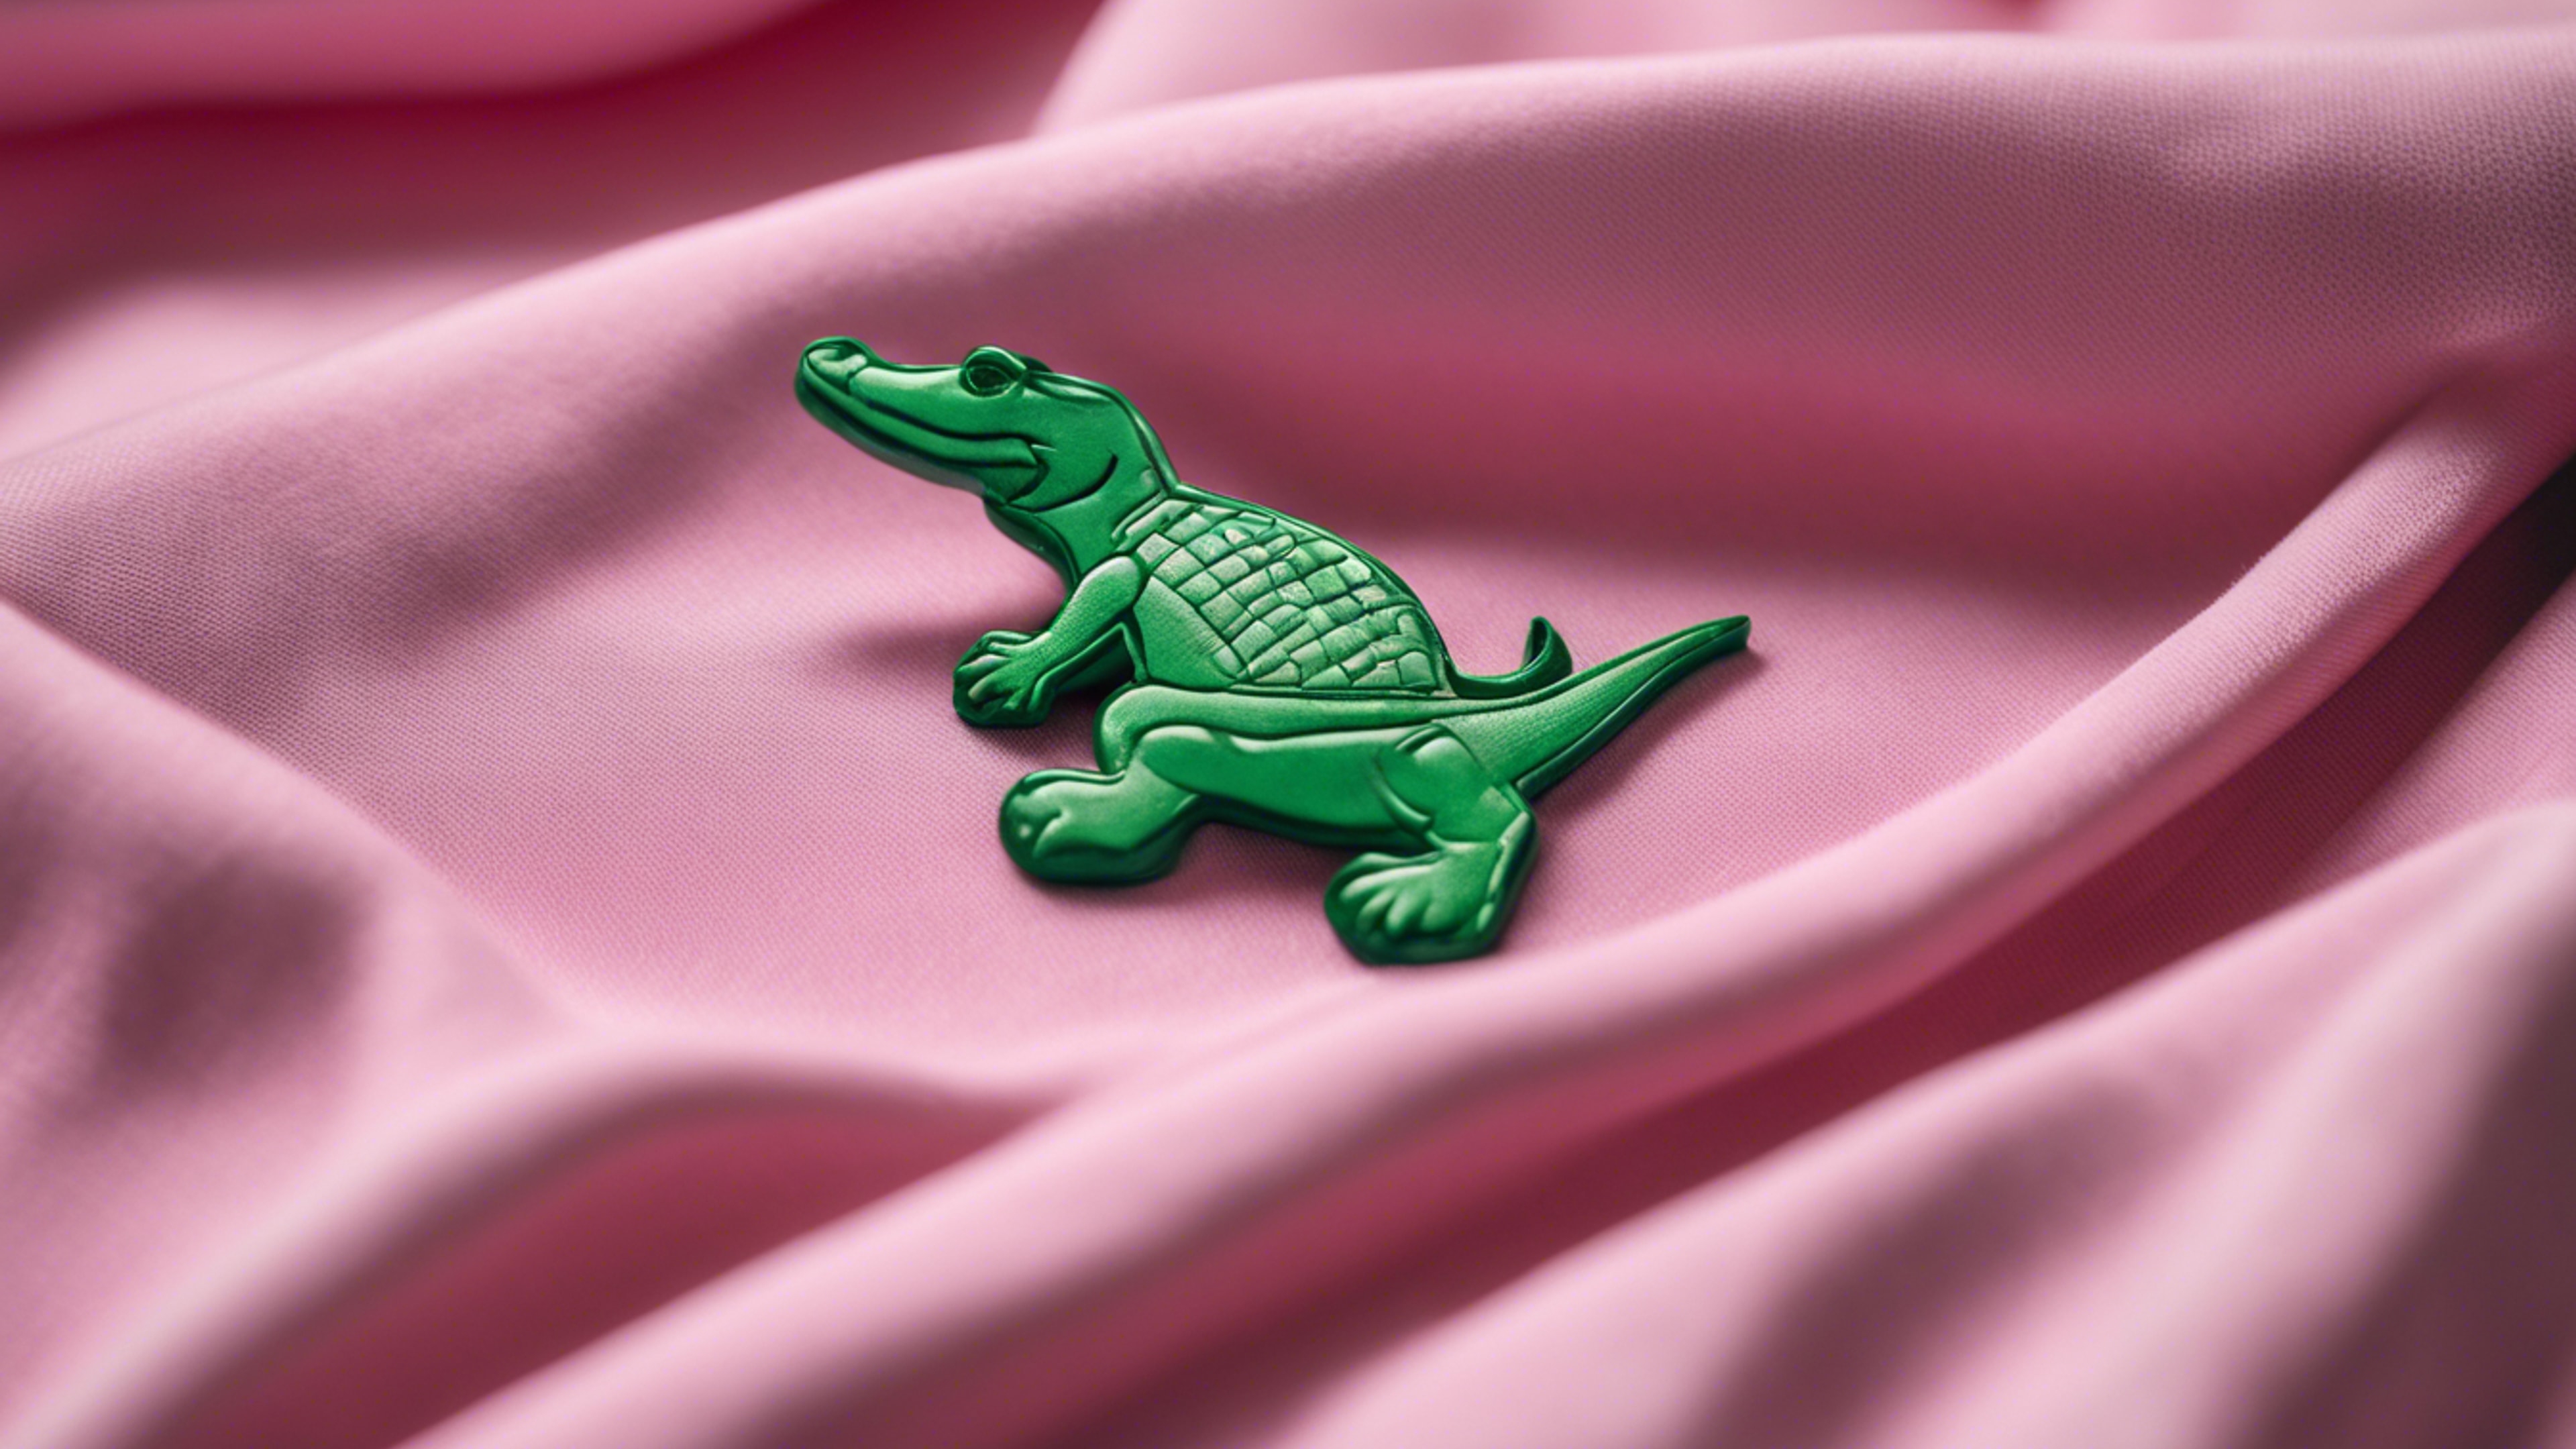 A pink polo shirt with a green alligator logo, folded neatly on a bed.壁紙[63d9ff960abf421e89a8]